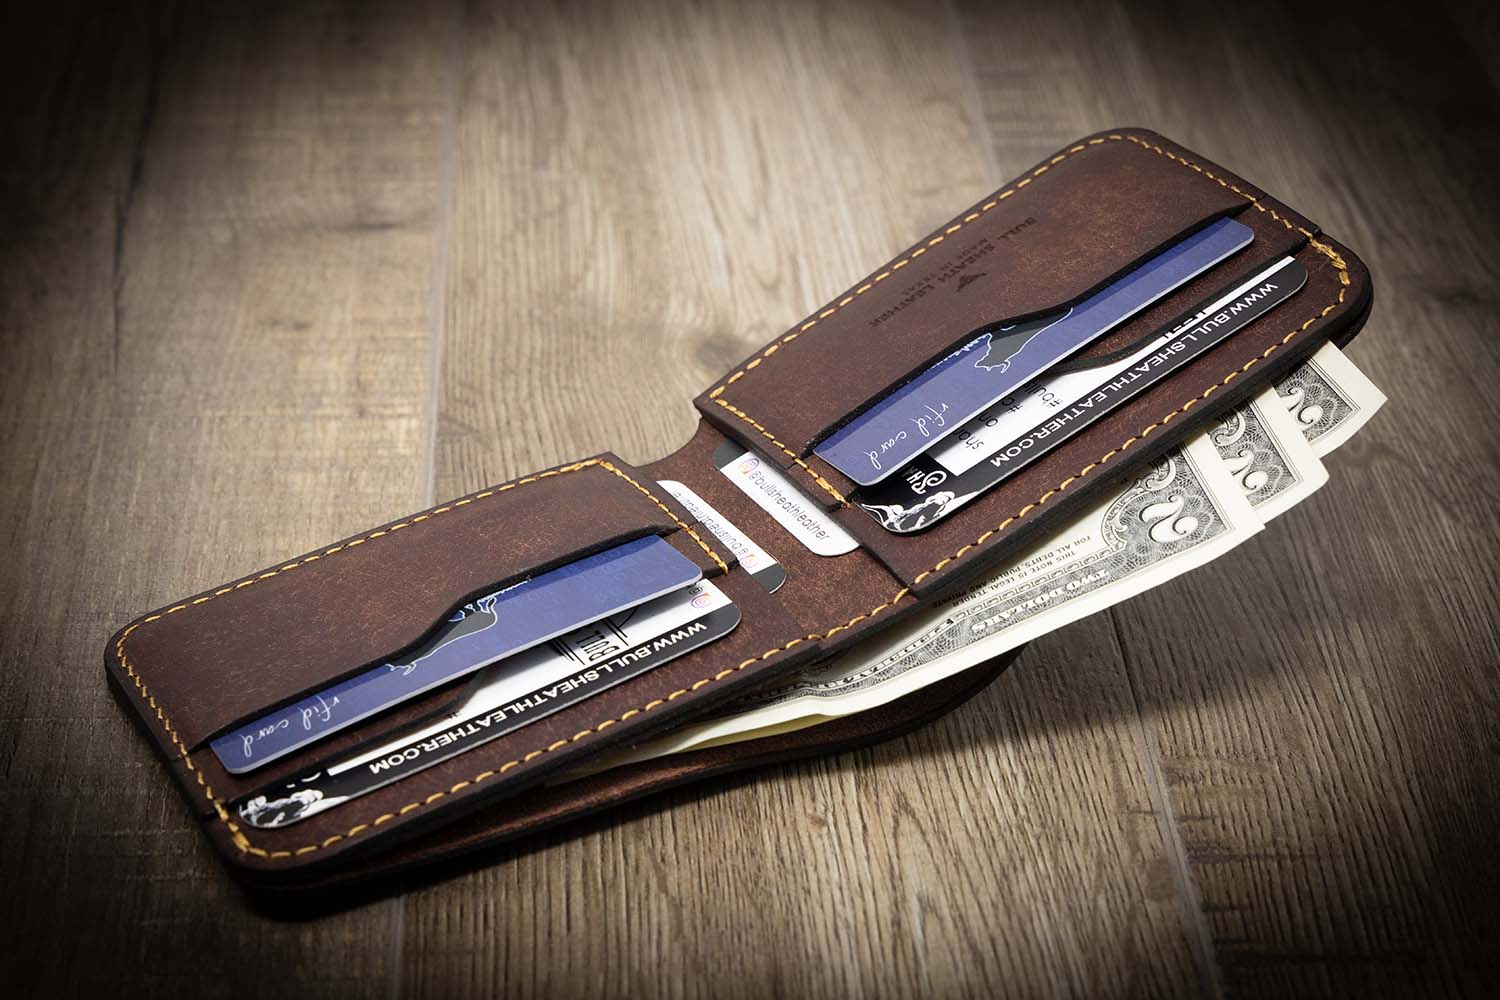 A classic leather bifold wallet with a cash pocket and room for a few cards